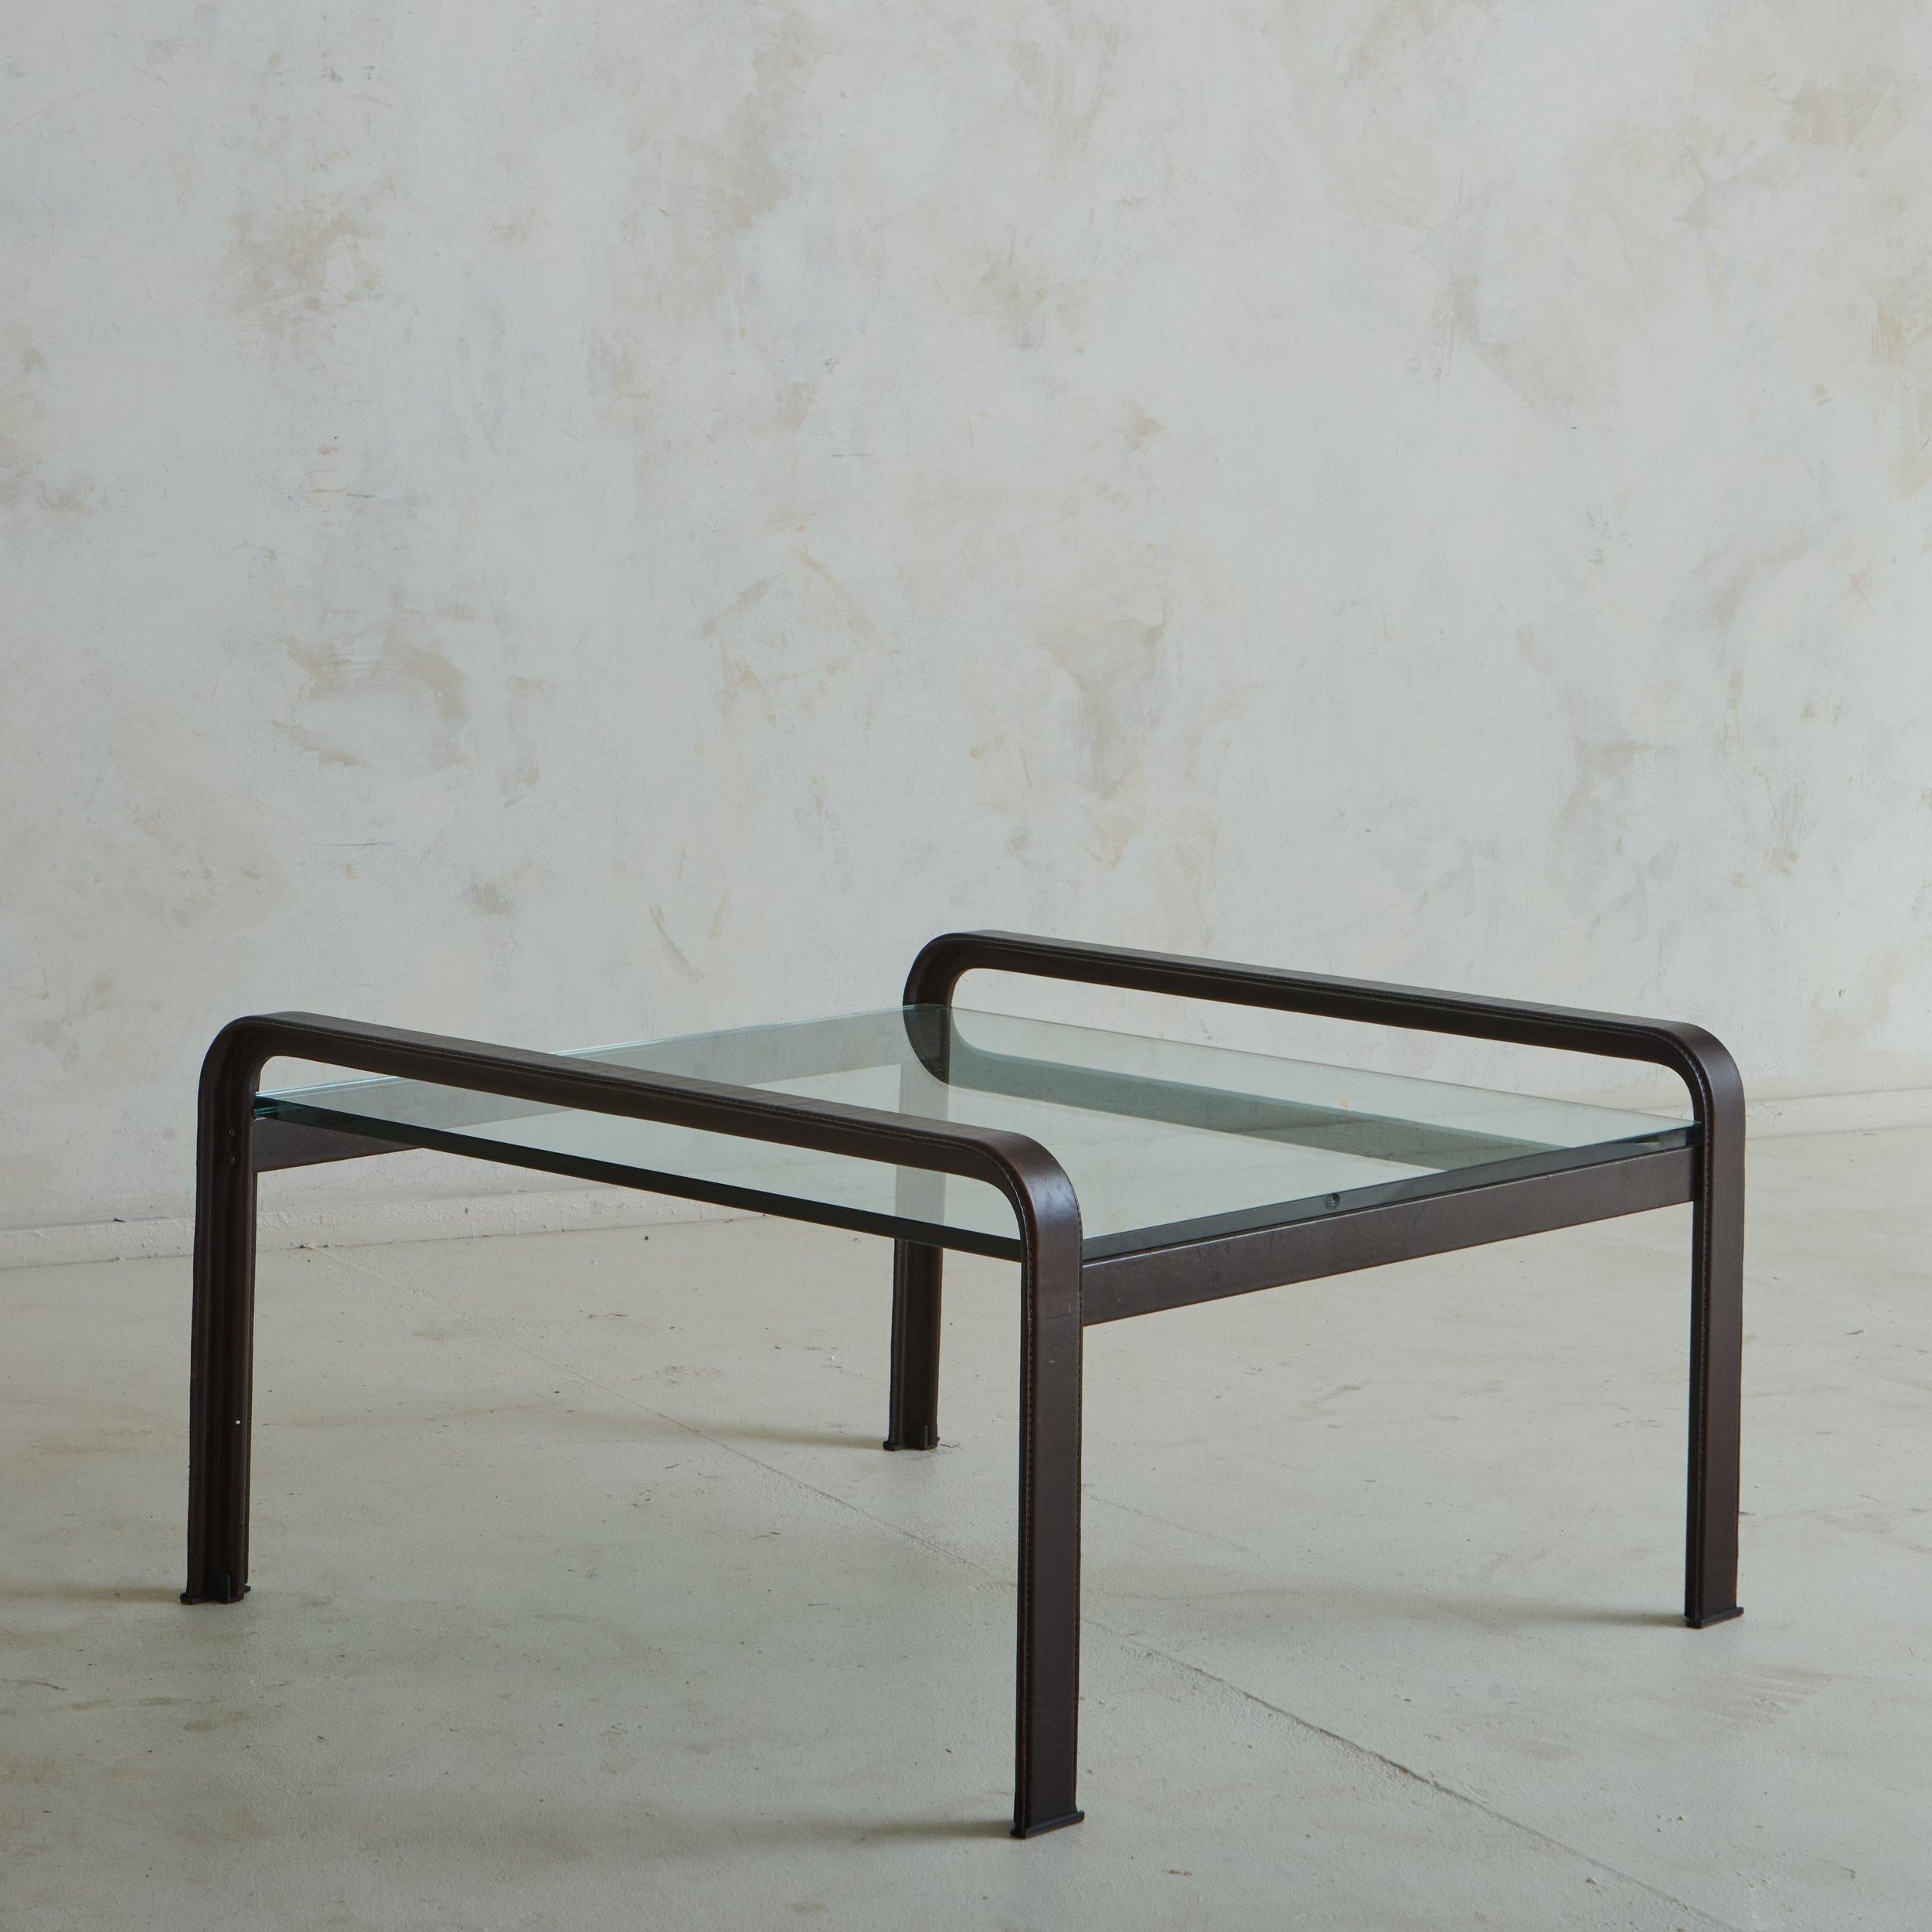 A Mid Century Italian side table designed by Tito Agnoli for Matteo Grassi in the 1970s. This classic table features a steel frame clad in chocolate brown leather with stitch detailing. The sides of the frame curve elegantly above the thick inset